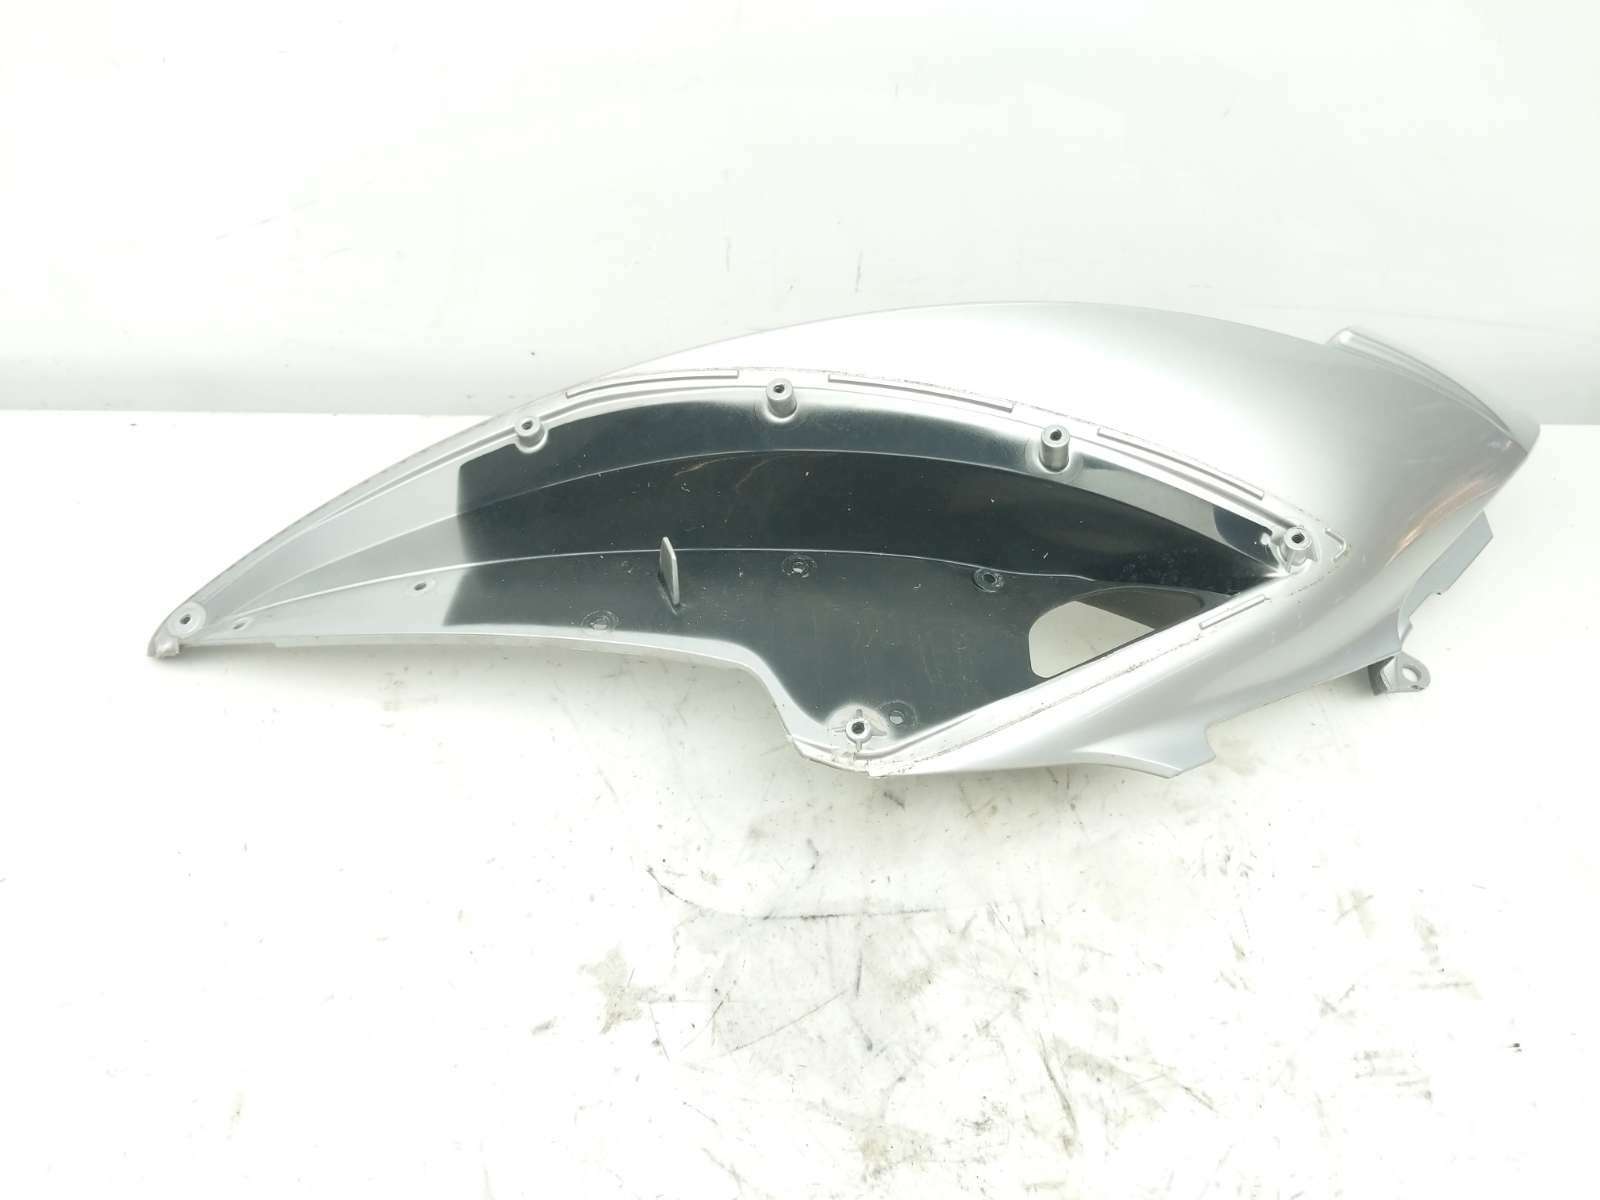 08 Seadoo RXP 255 Right Side Cover Panel Plastic Trim 291002119